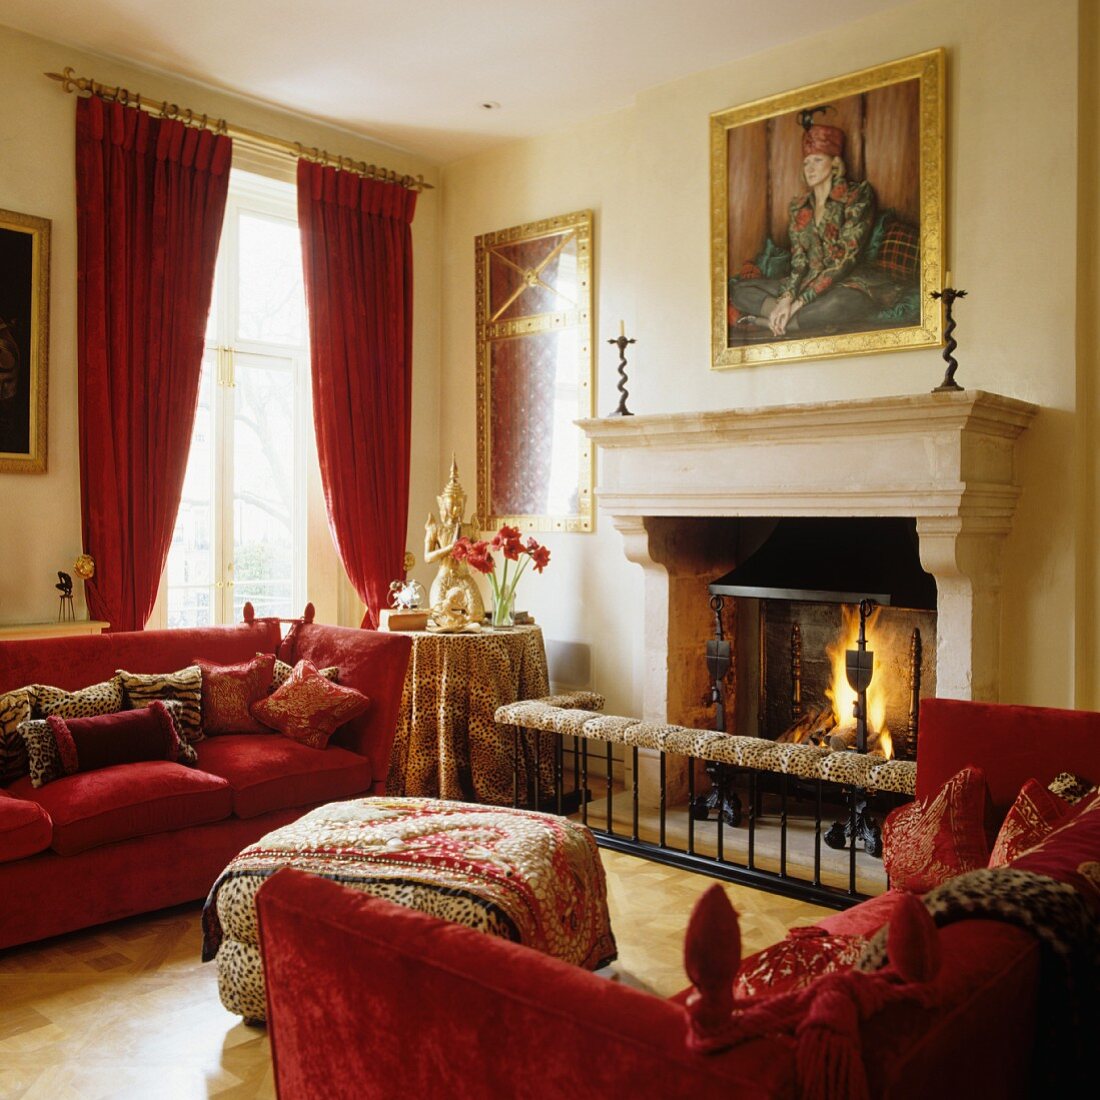 Two red Knole sofas and animal-skin print ottoman in front of classic fireplace